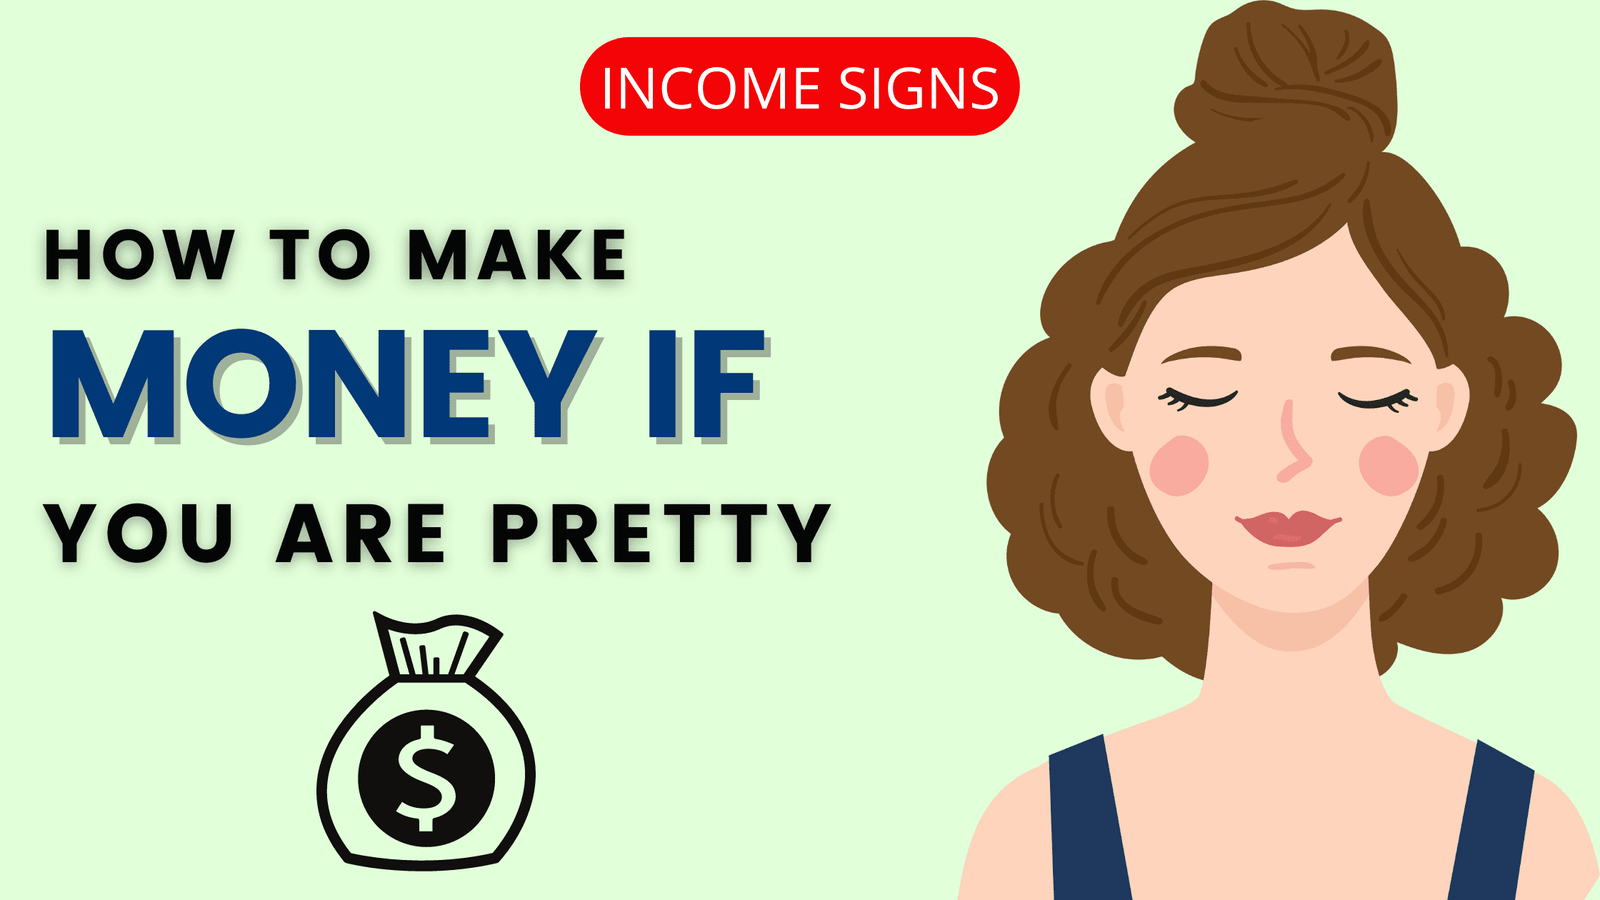 How to Make Money if You're Pretty - Income Signs